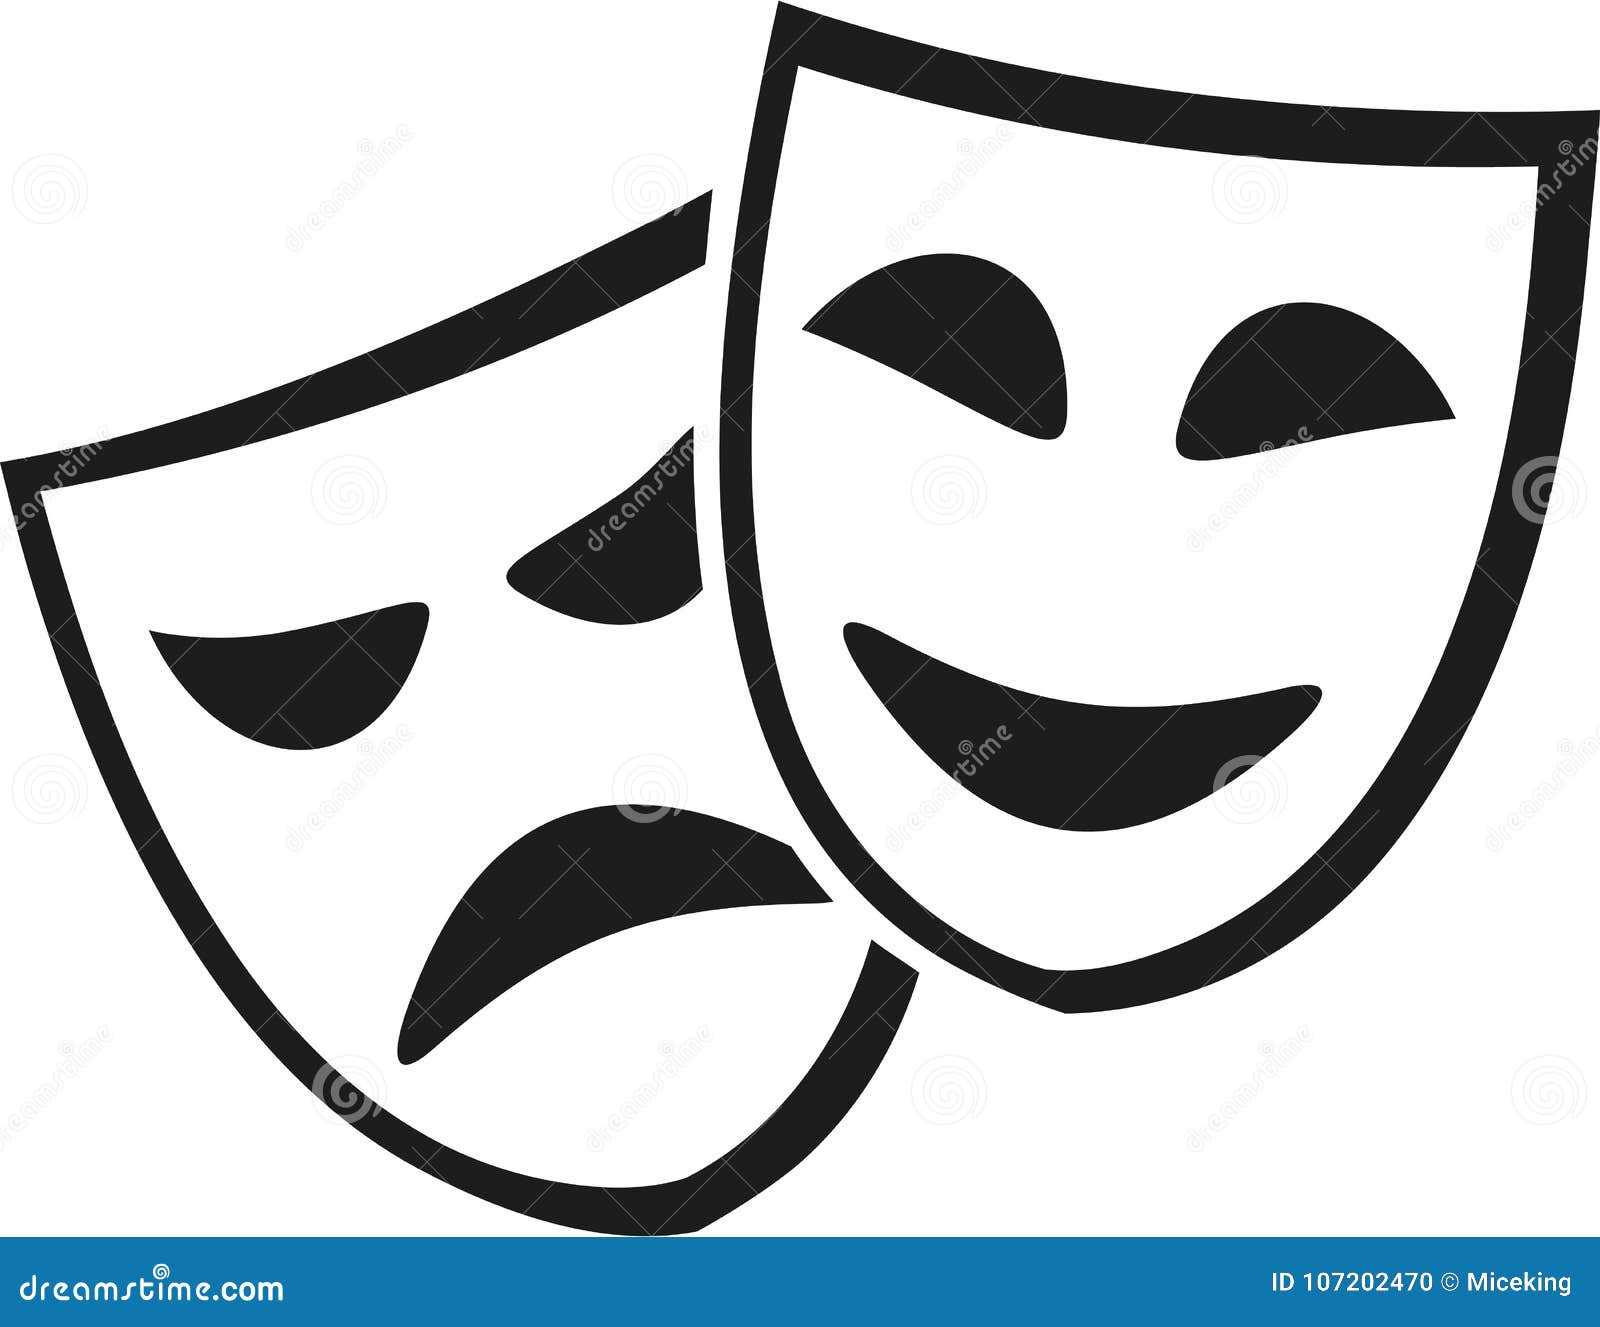 Theater masks Royalty Free Vector Image - VectorStock